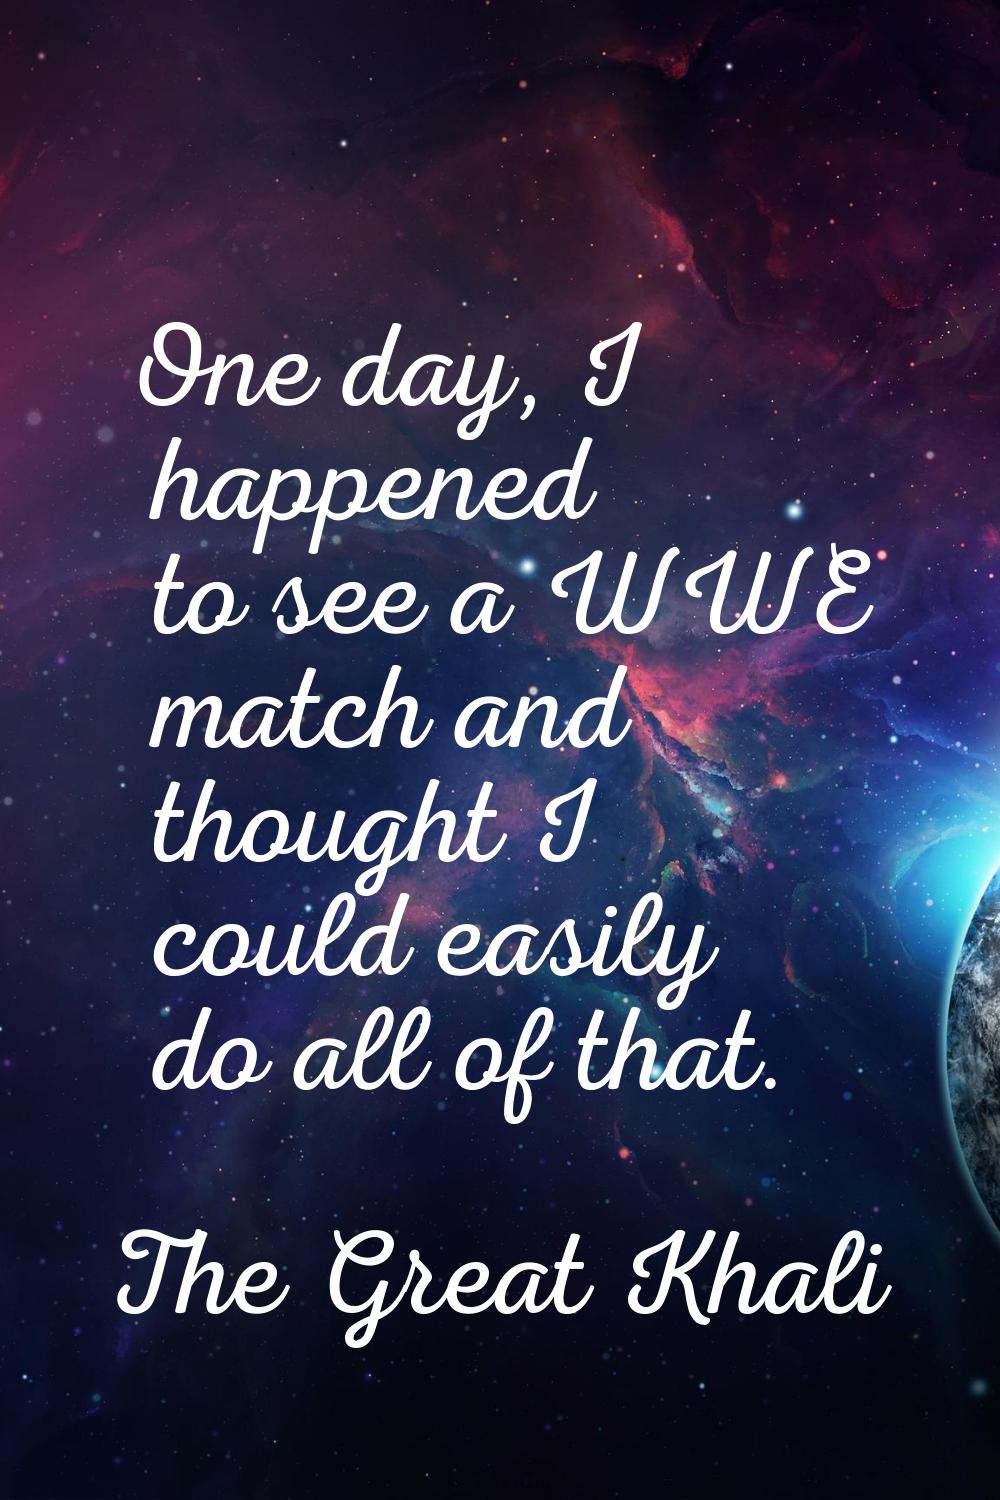 One day, I happened to see a WWE match and thought I could easily do all of that.